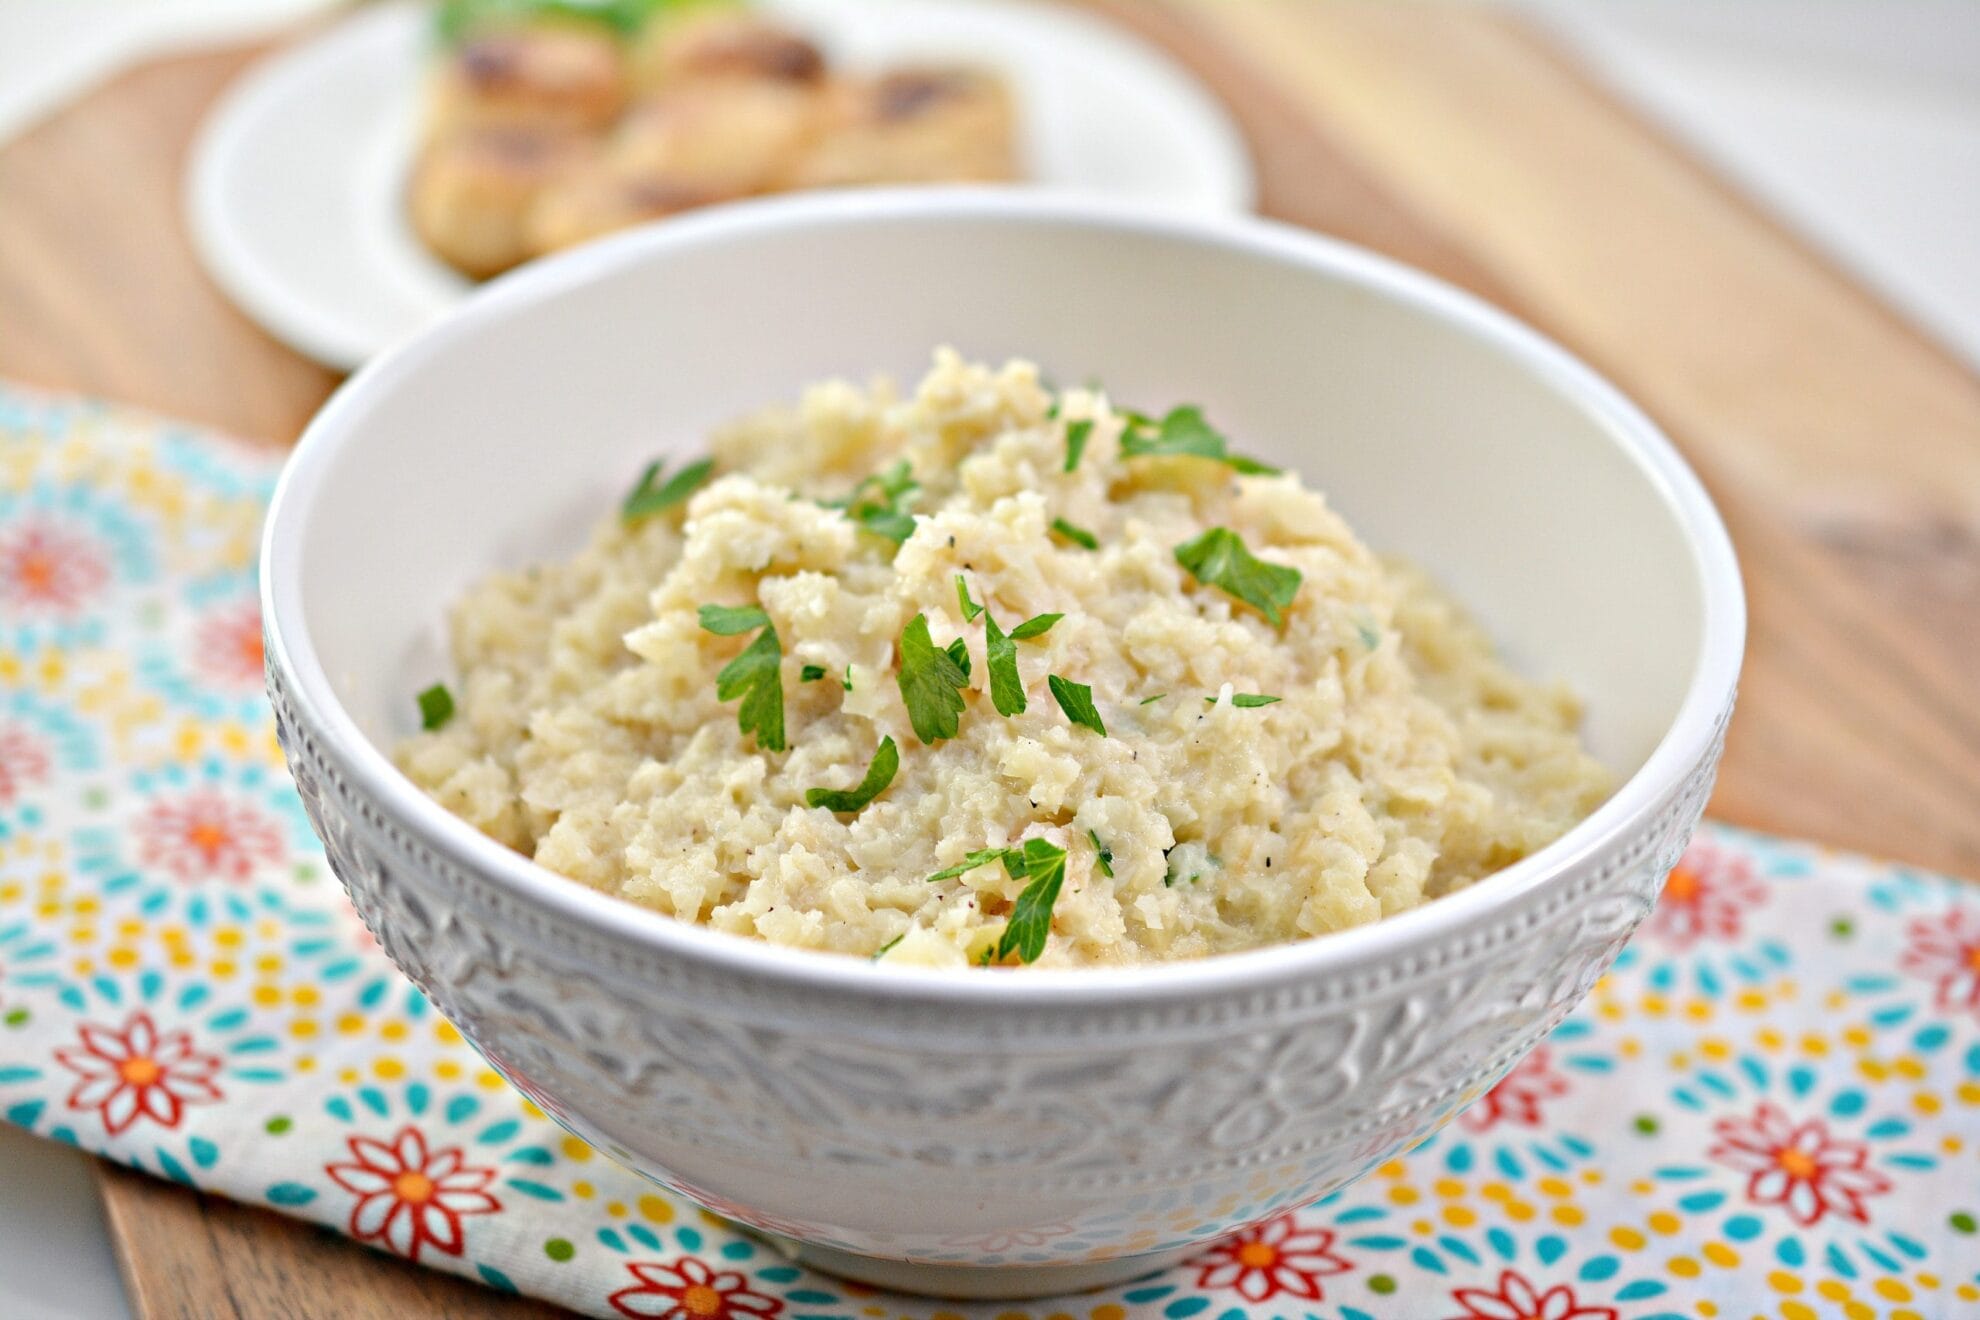 Love risotto but trying to live a Keto lifestyle? You need this Keto Parmesan Cauliflower Risotto recipe. Just as tasty as risotto made from rice, this keto risotto recipe is made from cauliflower and is low in carbs. Perfect for a Keto or Low Carb Lifestyle.